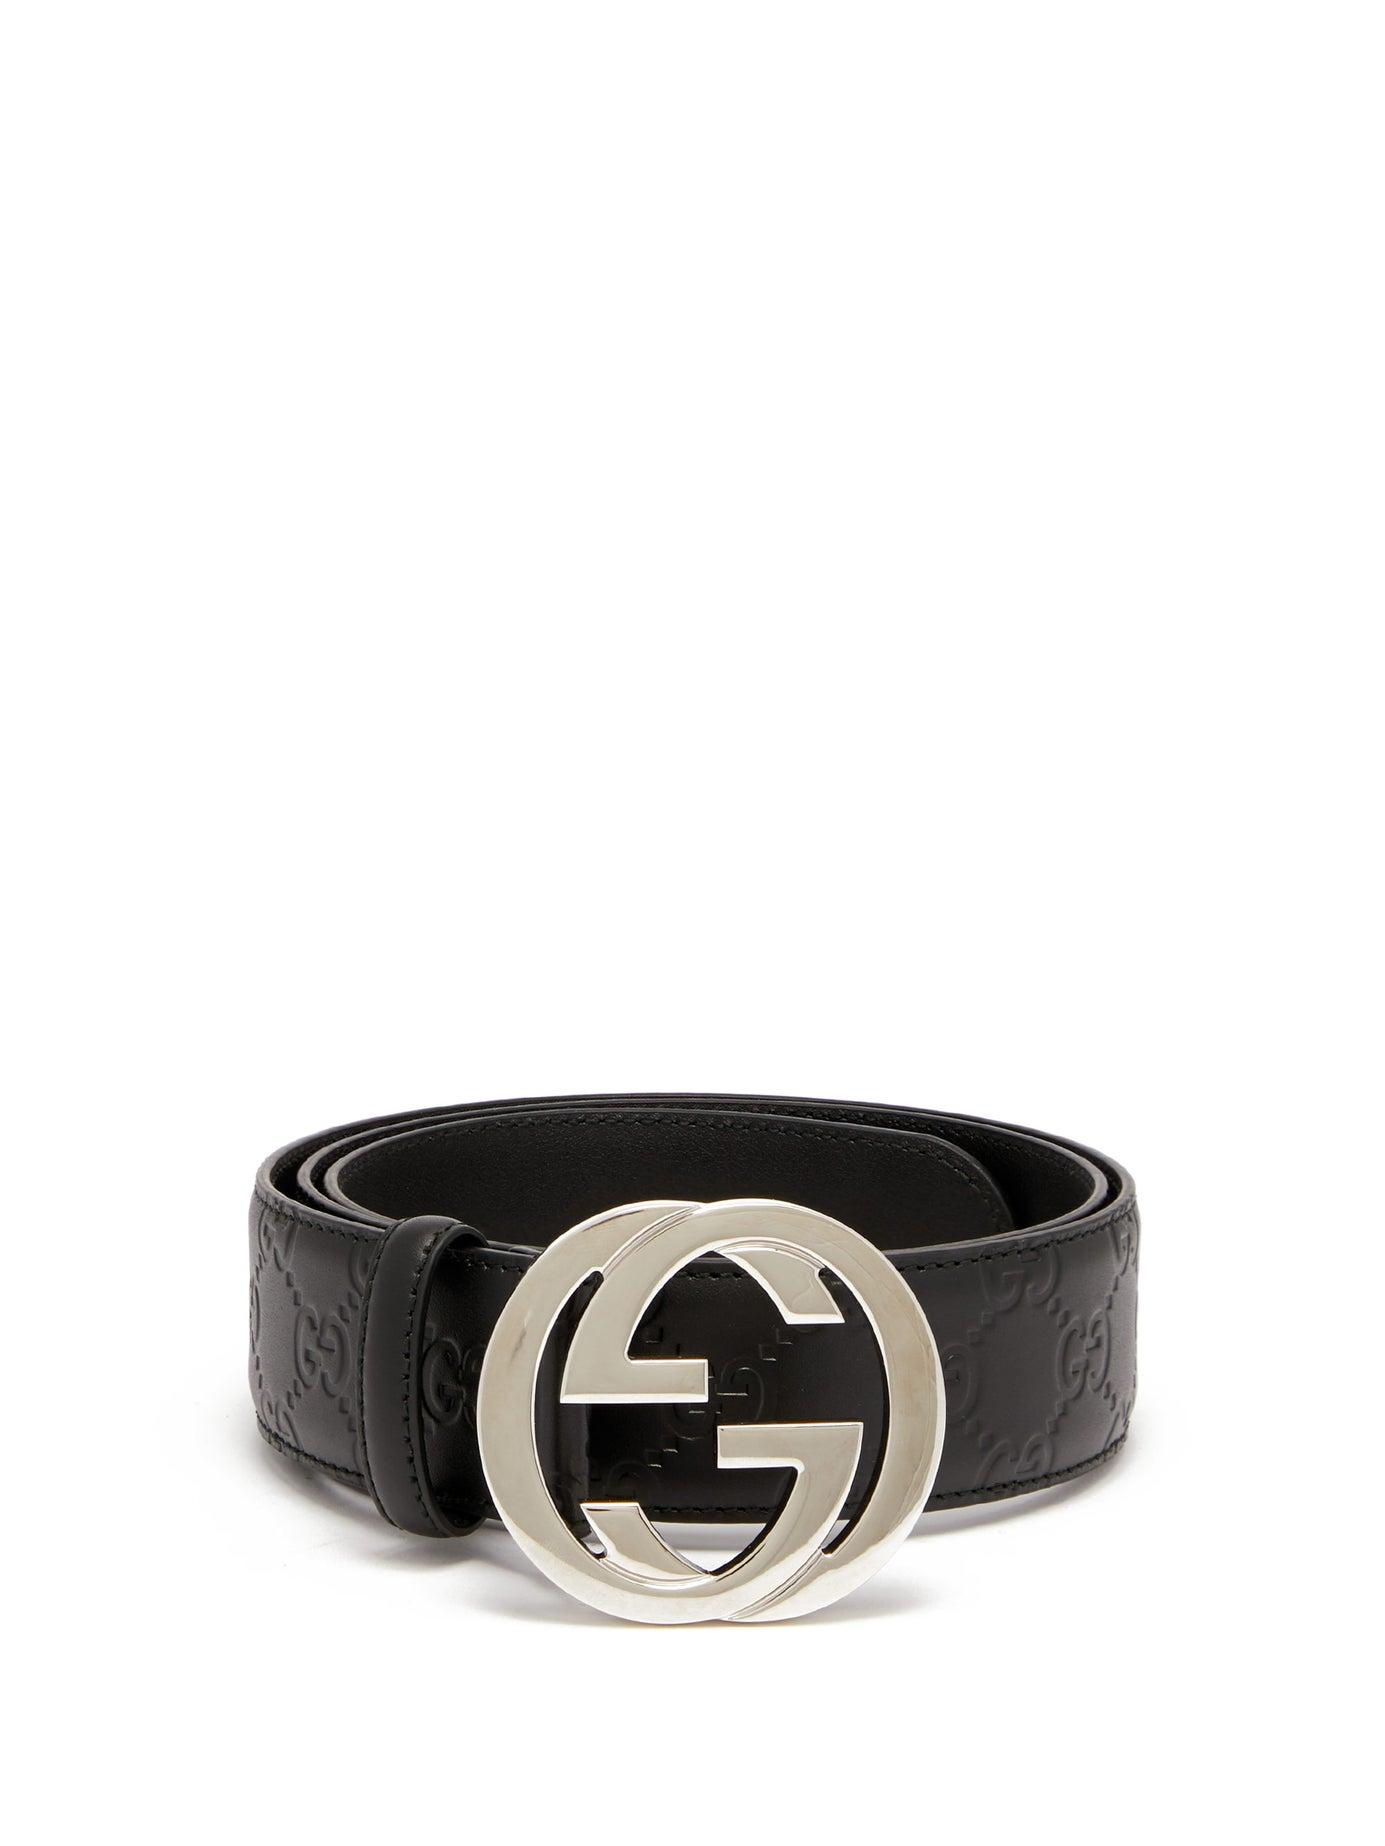 Gucci Signature Gg-logo Leather Belt in Black for Men - Lyst